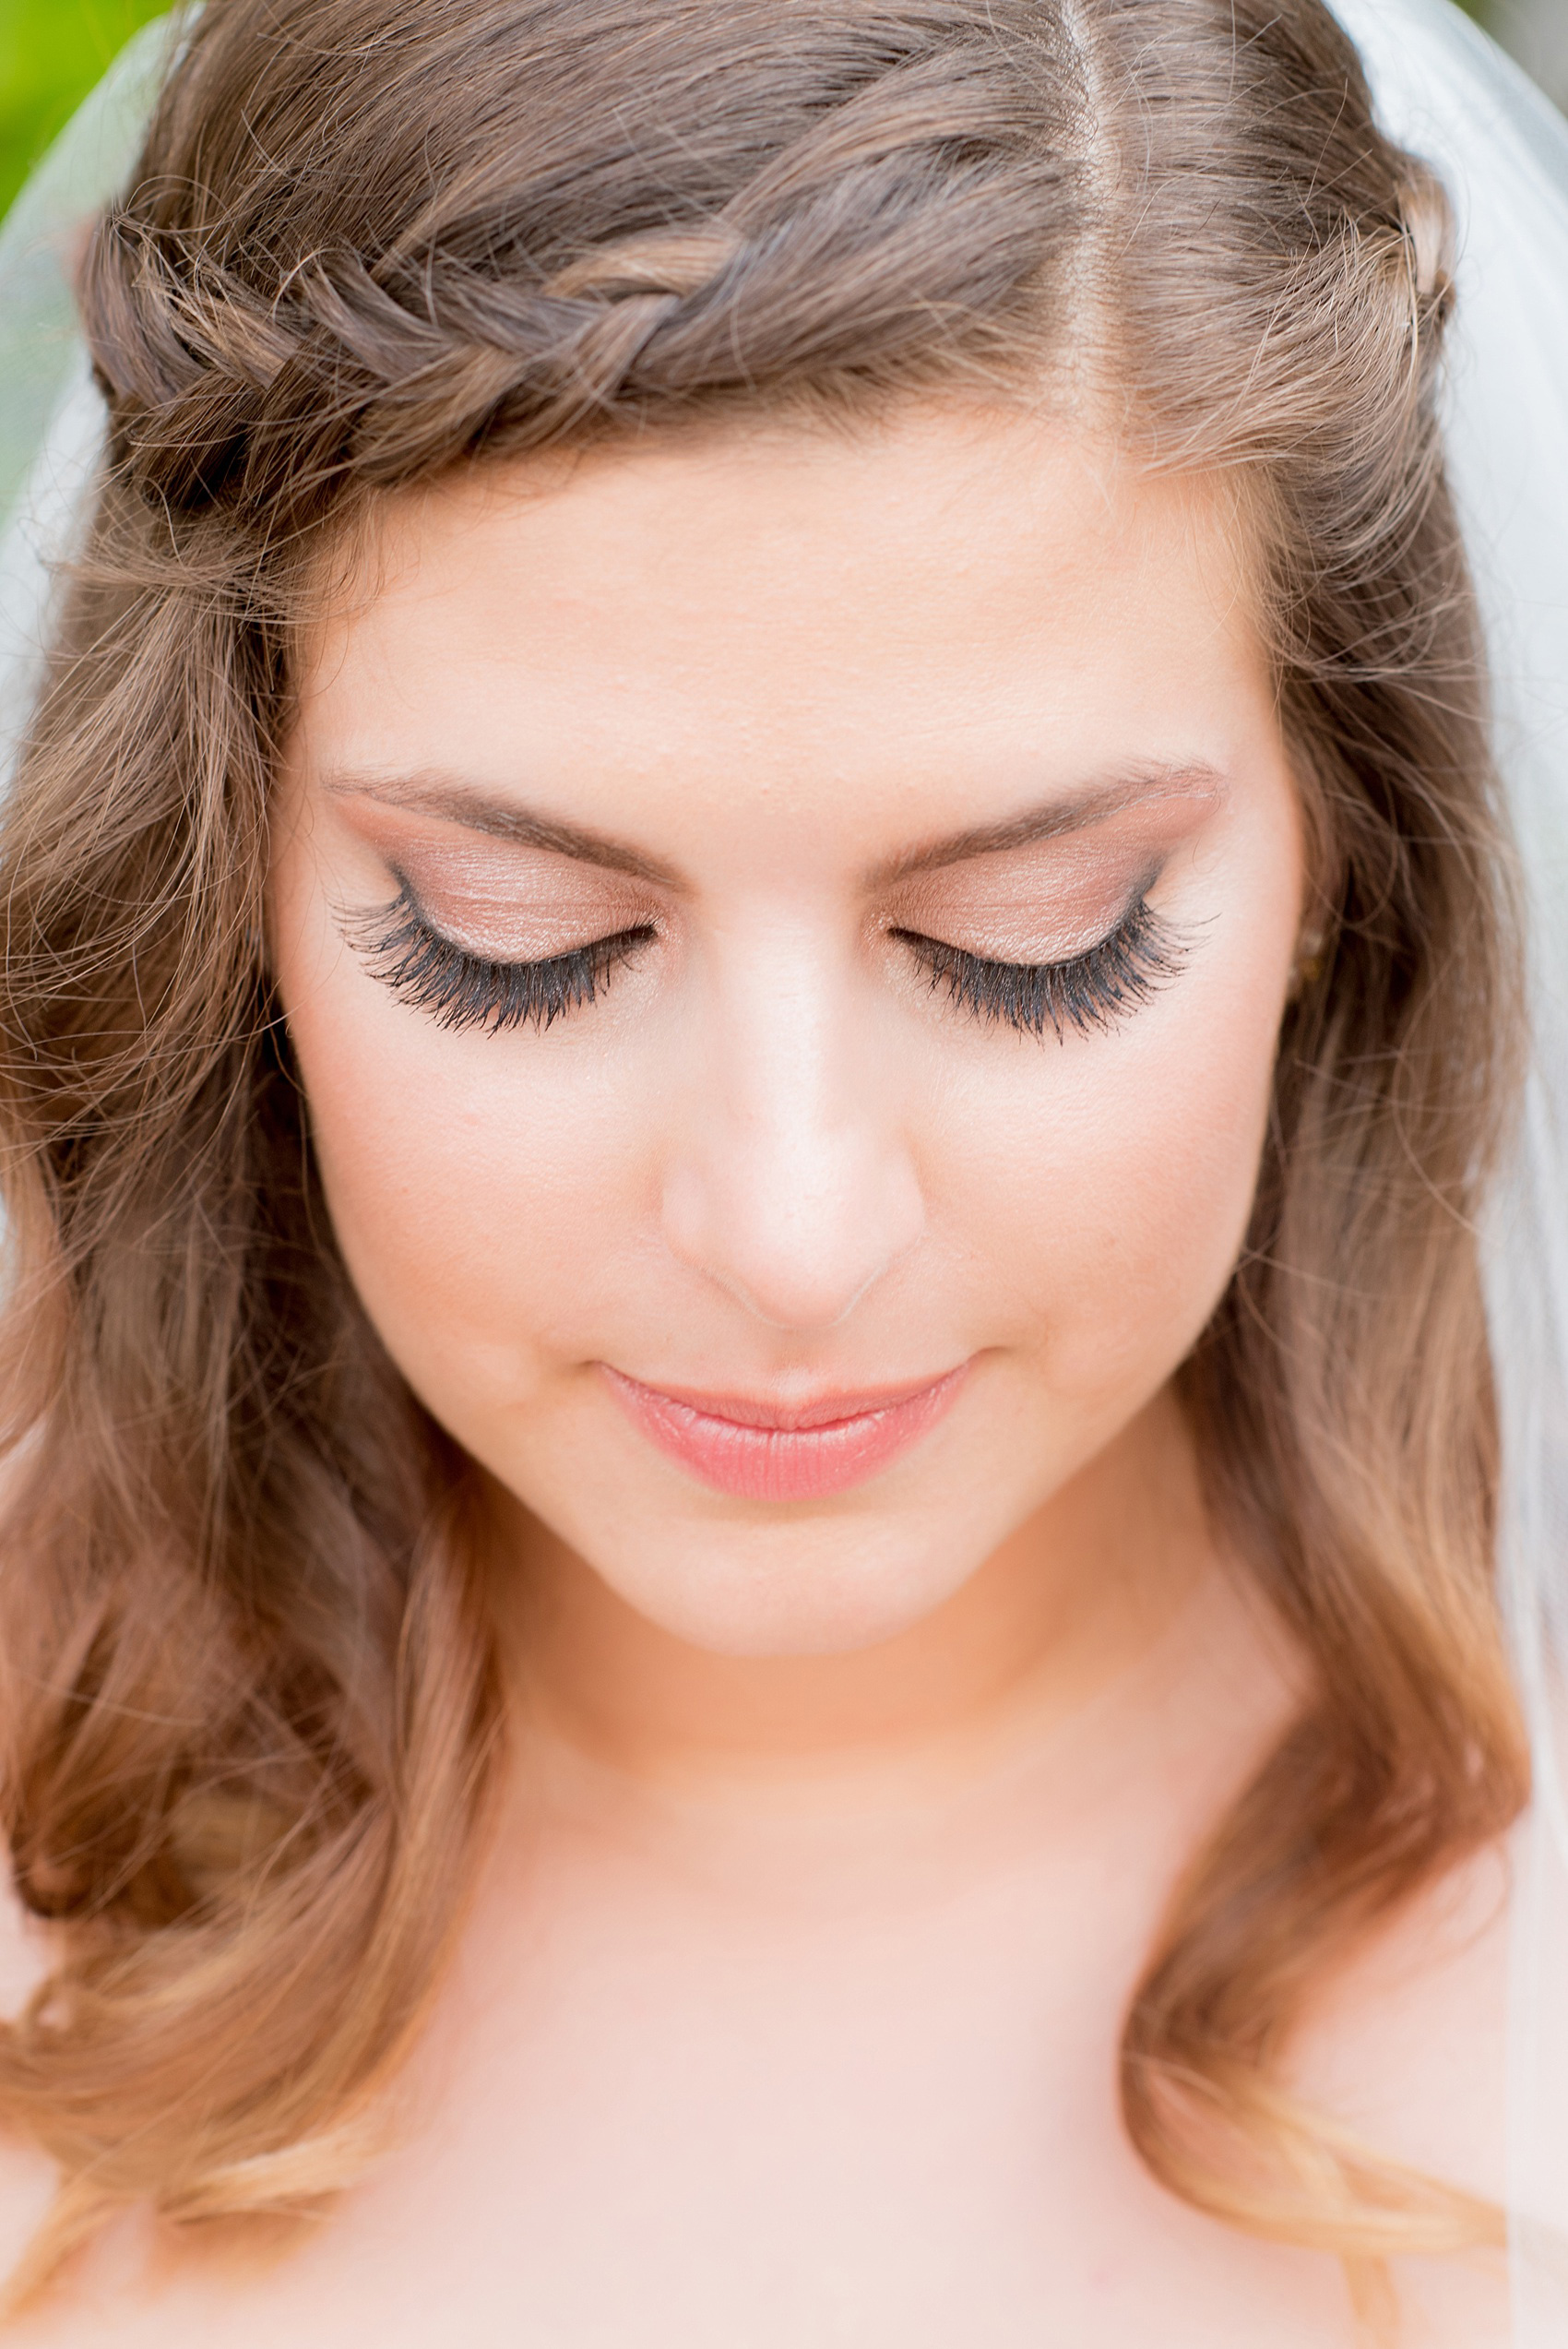 Mikkel Paige Photography photo of a wedding at the Madison Hotel in NJ. Image of the bride in her fitted, beaded BHLDN gown with makeup and lashes.